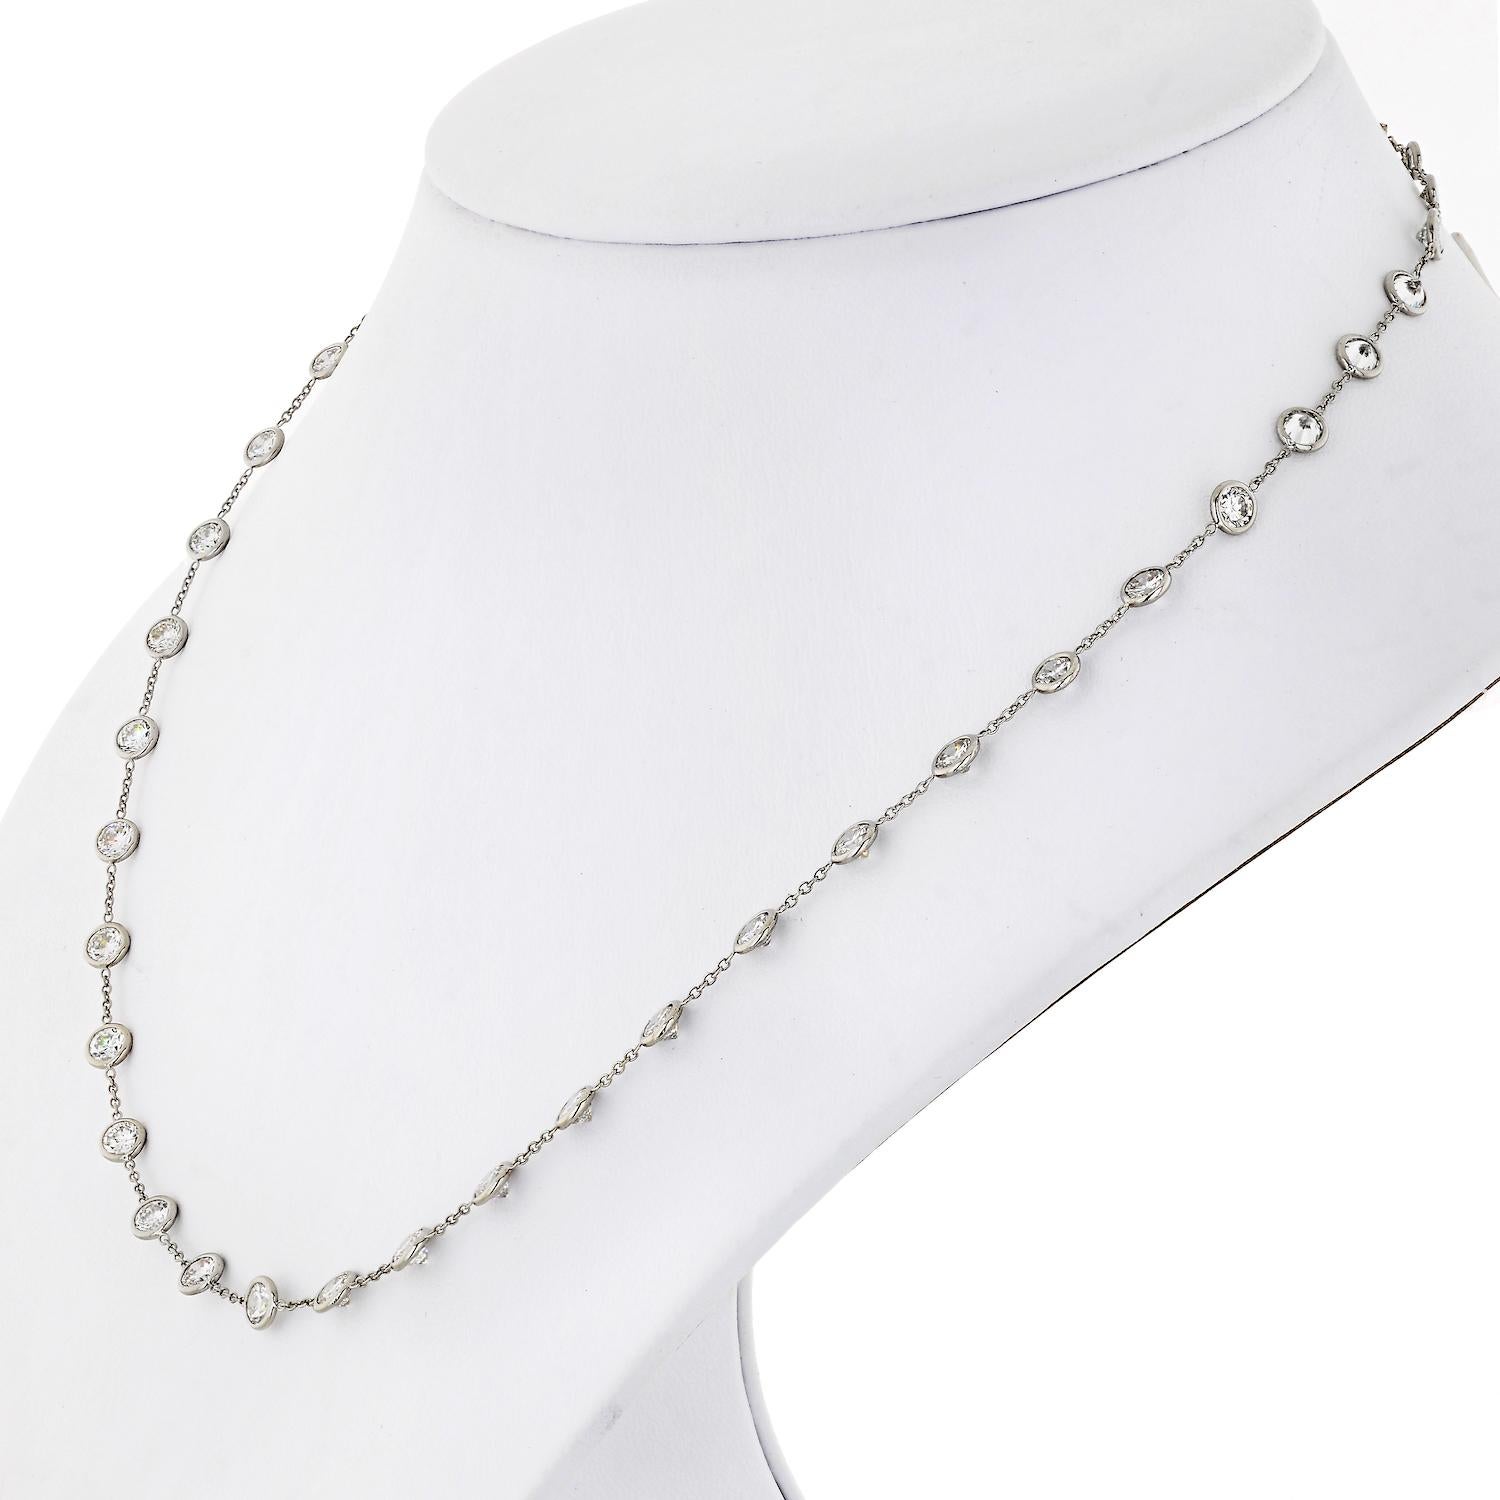 Made in Platinum this handmade diamond by the yard is truly amazing. Each diamond is almost a quarter of a carat, and all 40 diamonds make this necklace a stunning 9 carat jewel. 
Quality G-H color, VS-SI clarity. 
Apprisal of authenticity included